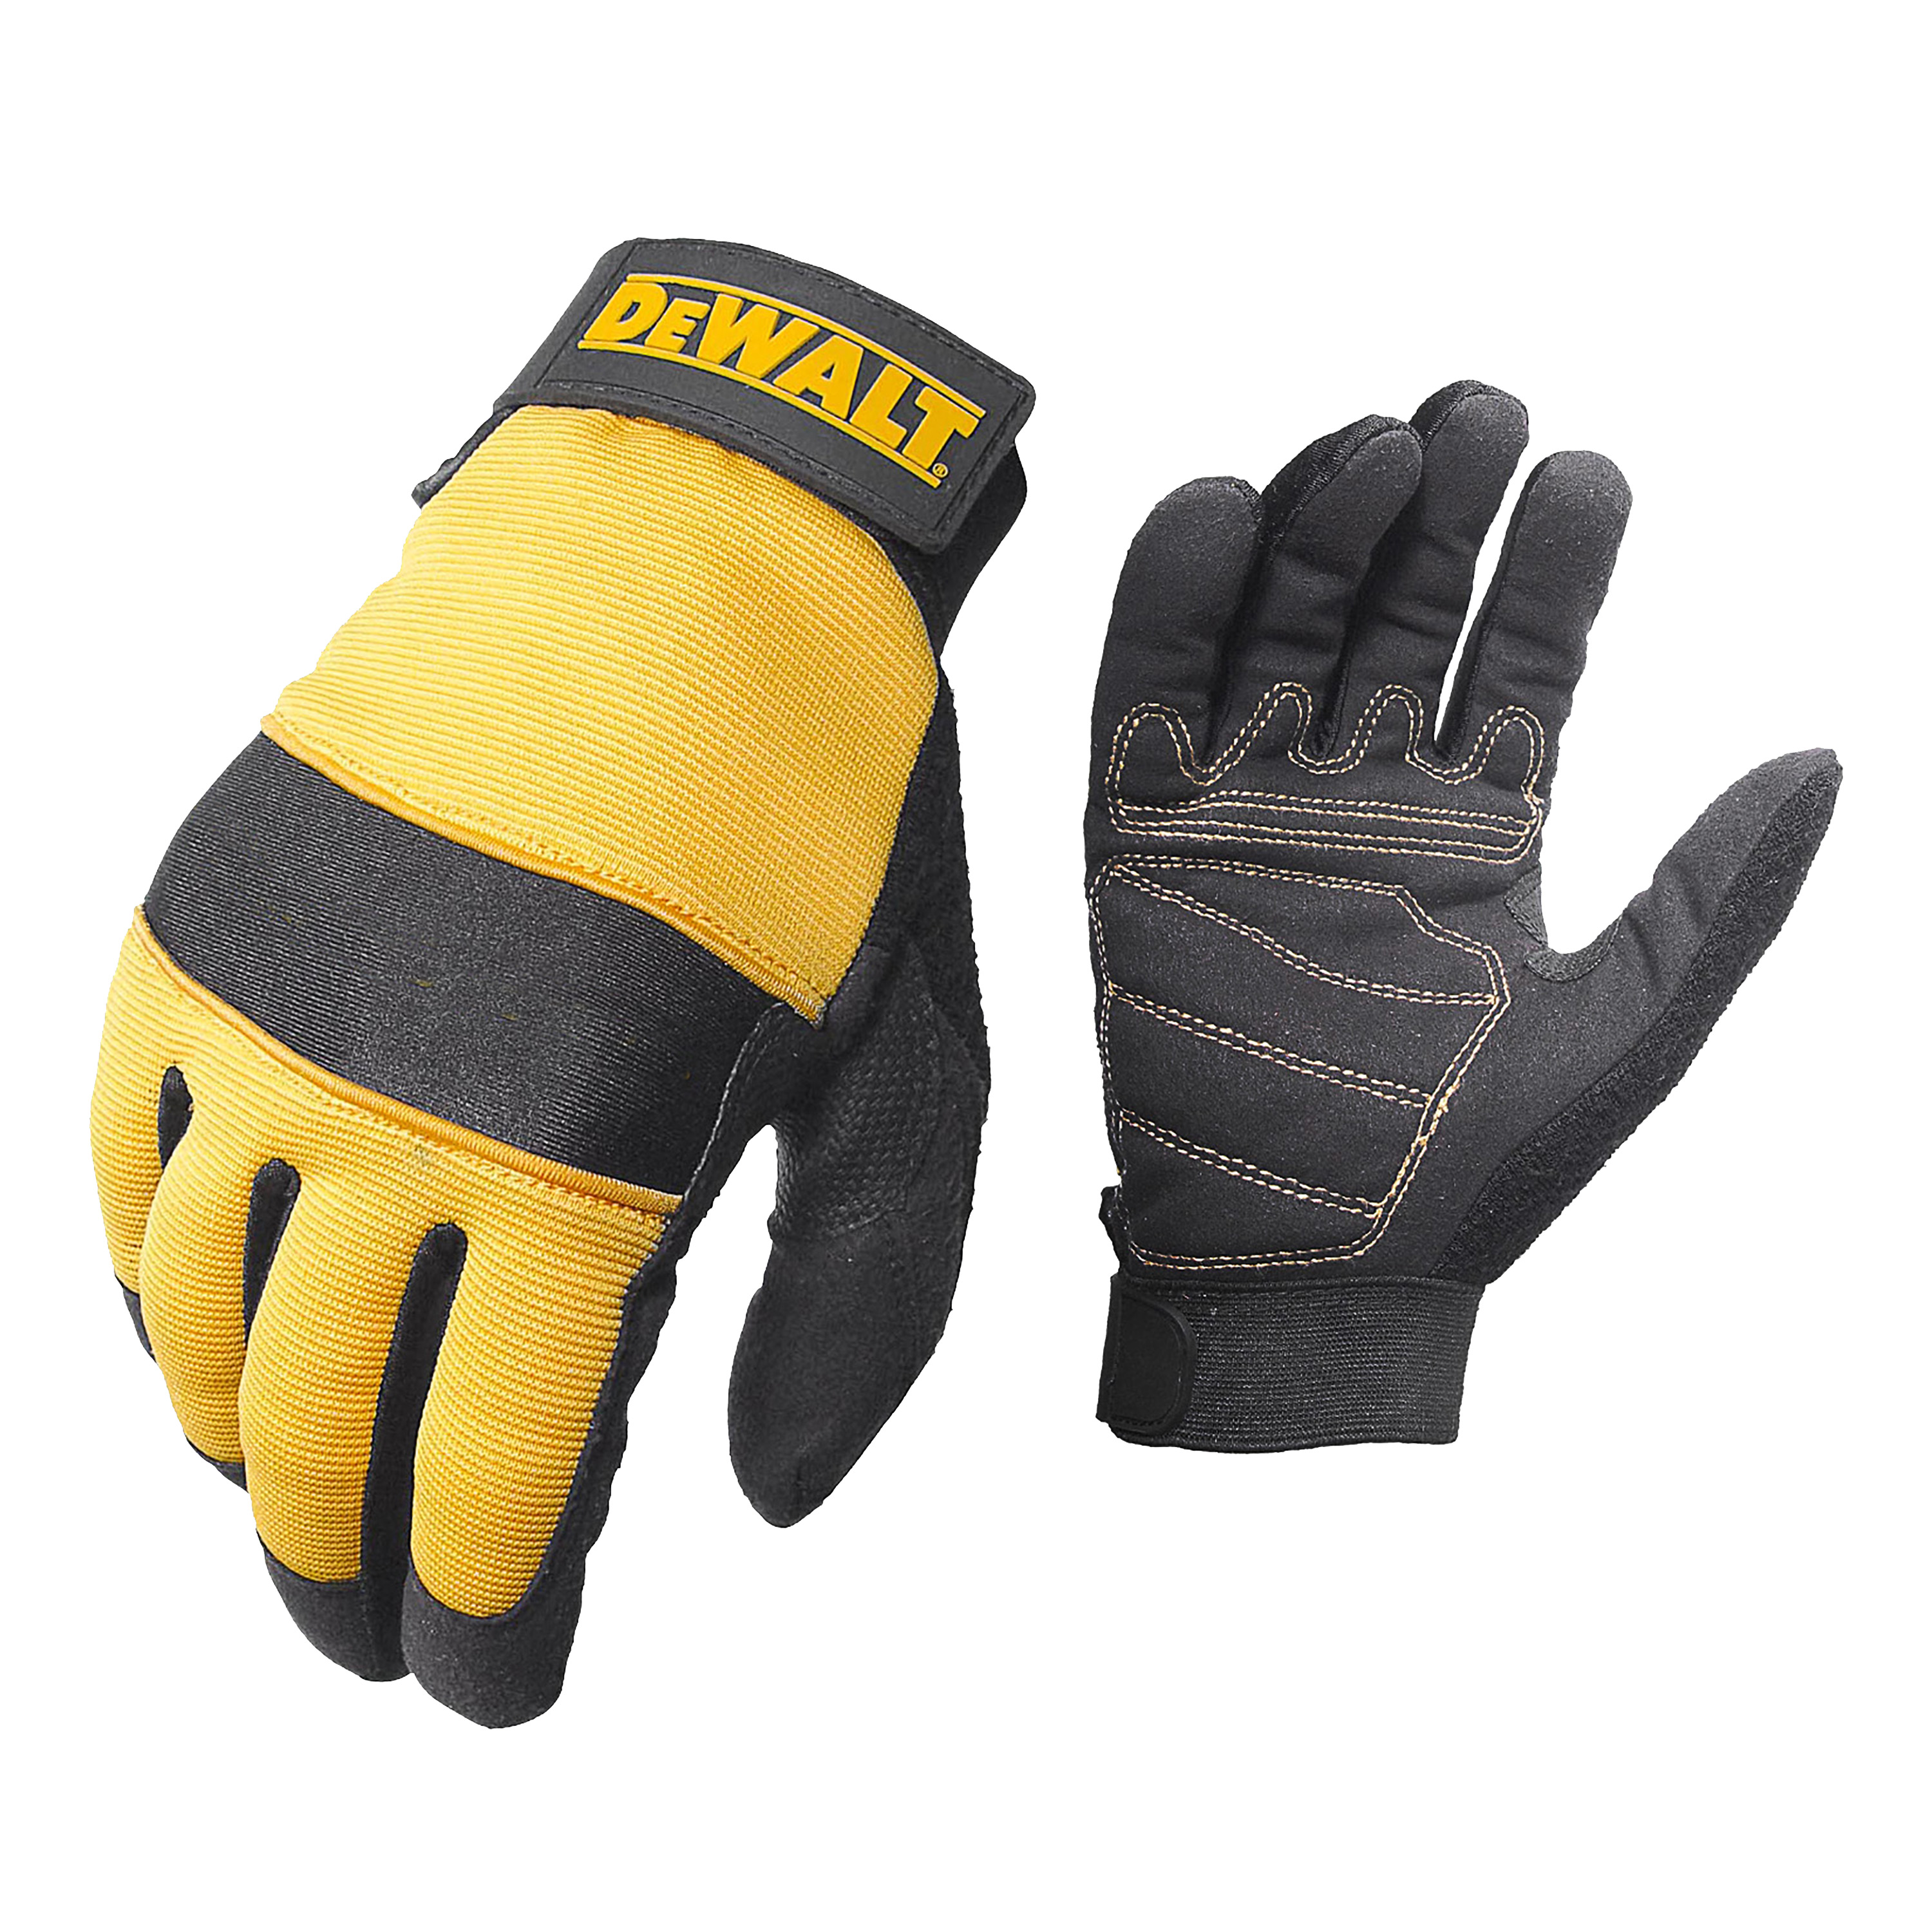 DPG20 All Purpose Synthetic Leather Glove - Size XL - Leather